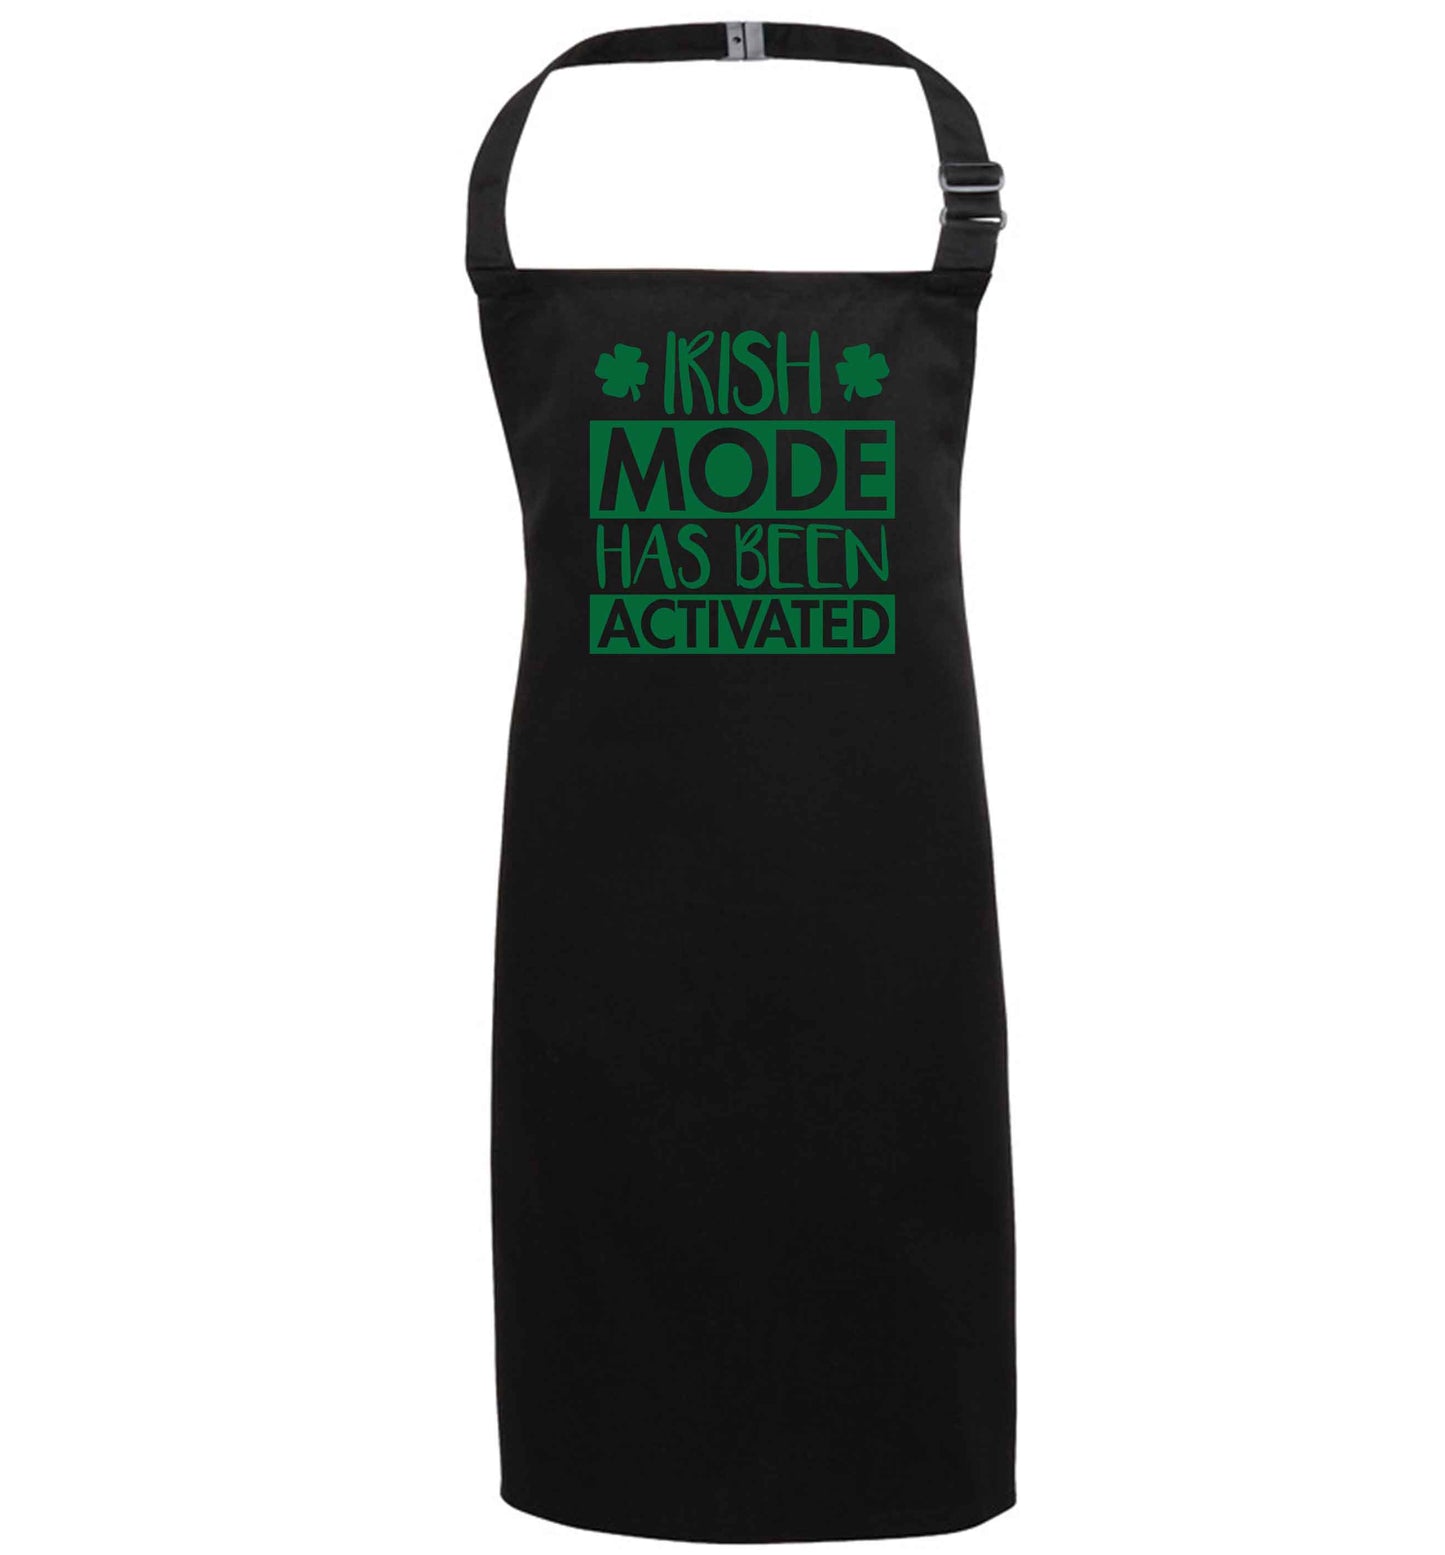 Irish mode has been activated black apron 7-10 years